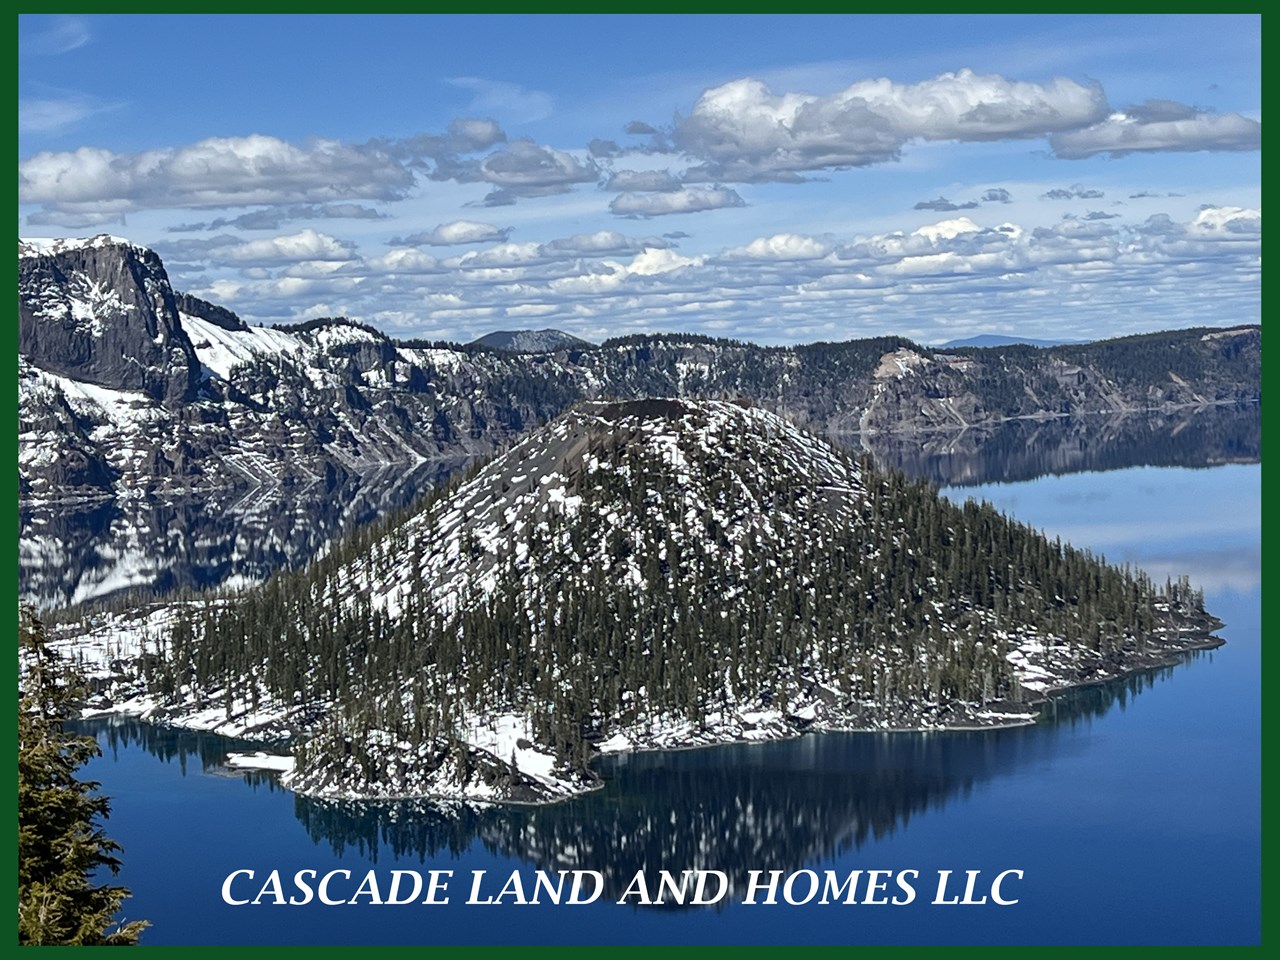 crater lake national park is only about 45 minutes away!  crater lake is the deepest lake in the country, and is oregon's only national park. aside from the lake, you can also hike, camp, backpack and explore the park. the whole park is an area of incredible beautiful!